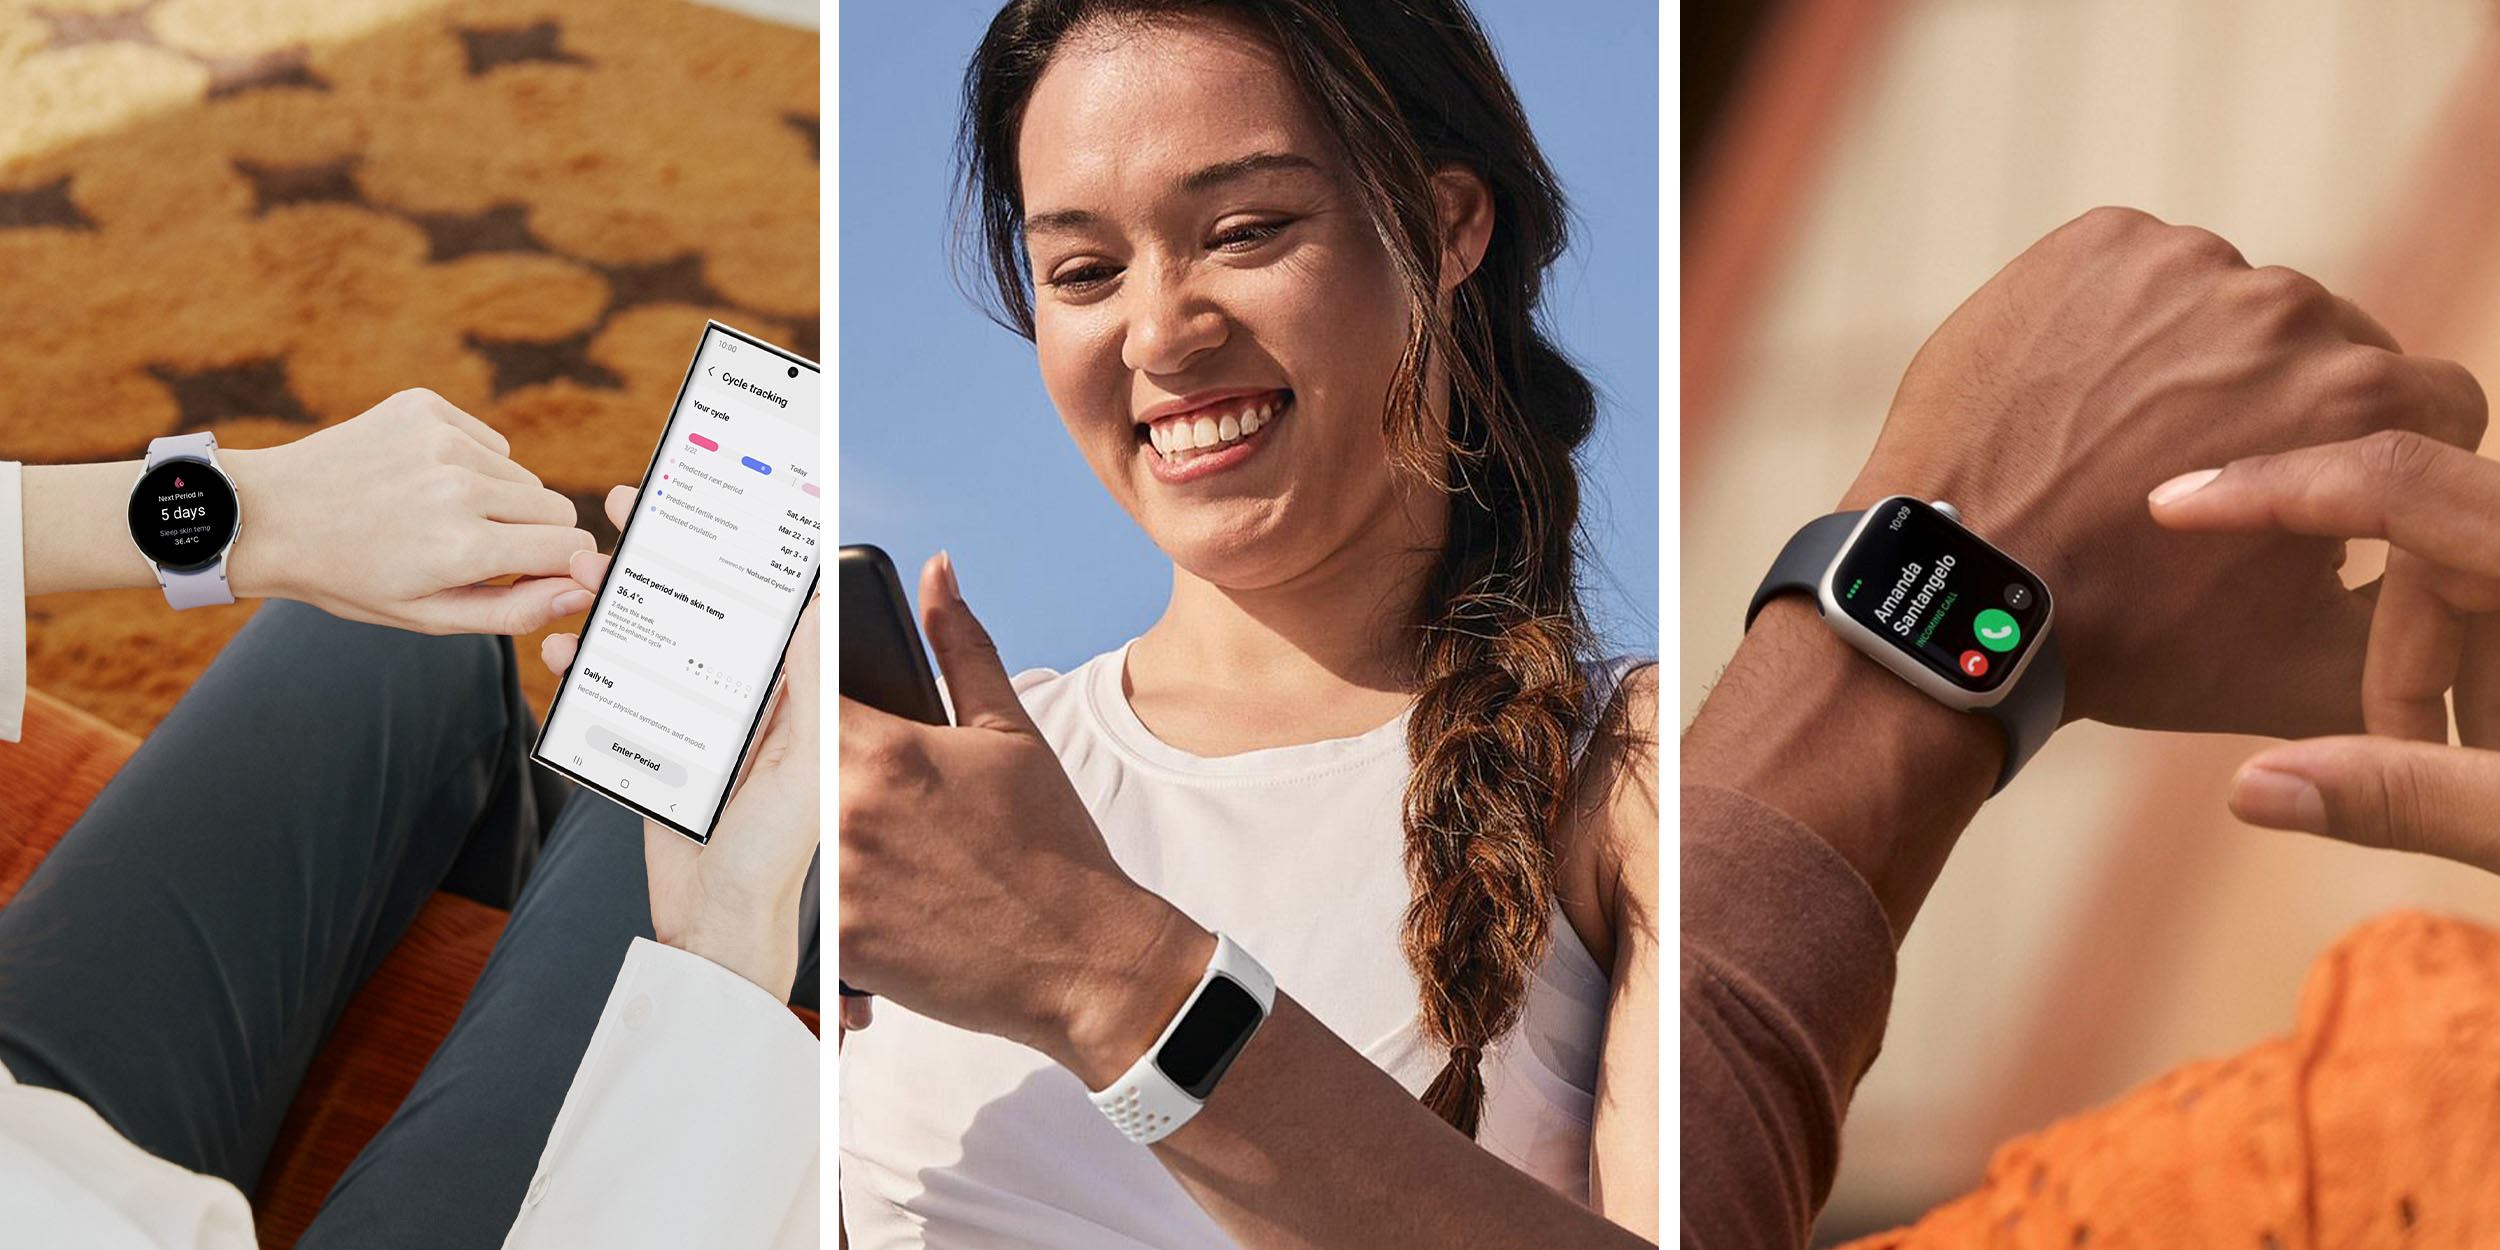 How Many Competitors Are In The Fitness Tracker Industry